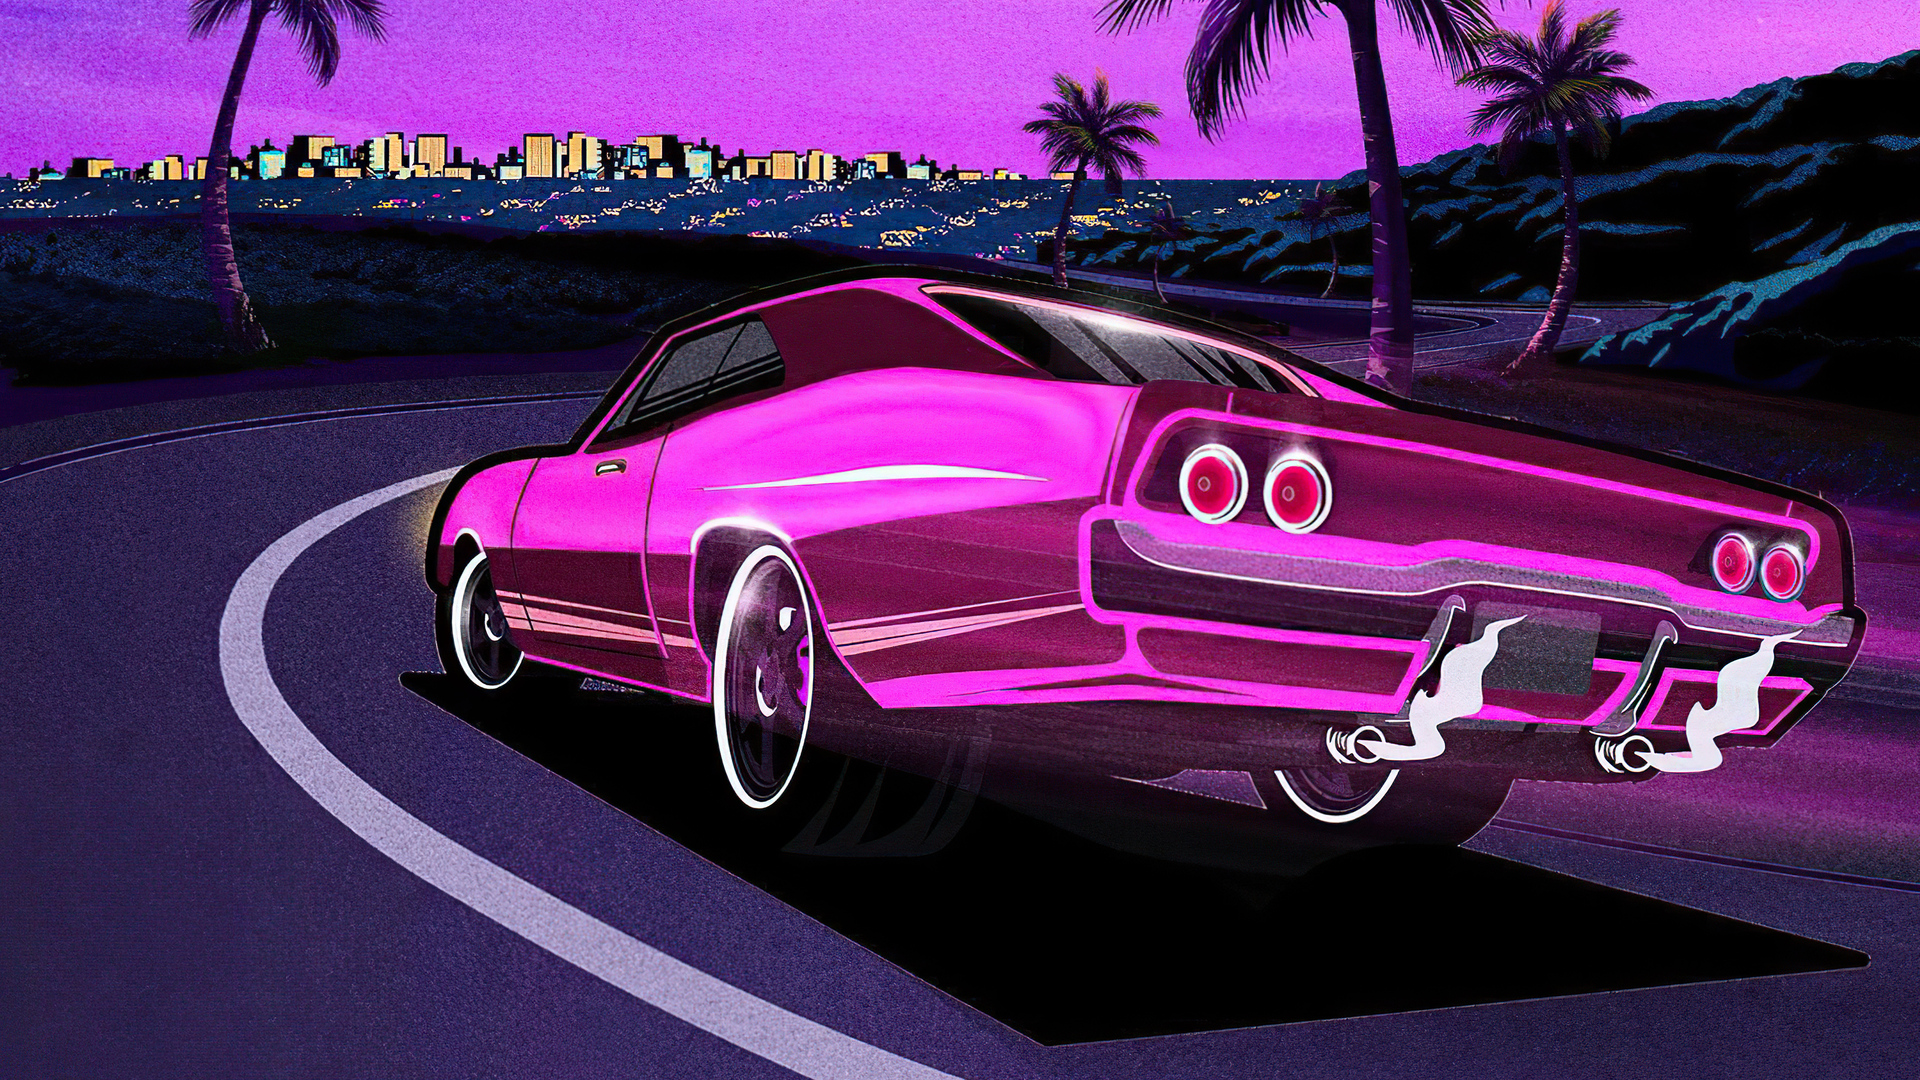 outrun-the-night-y0.jpg. 